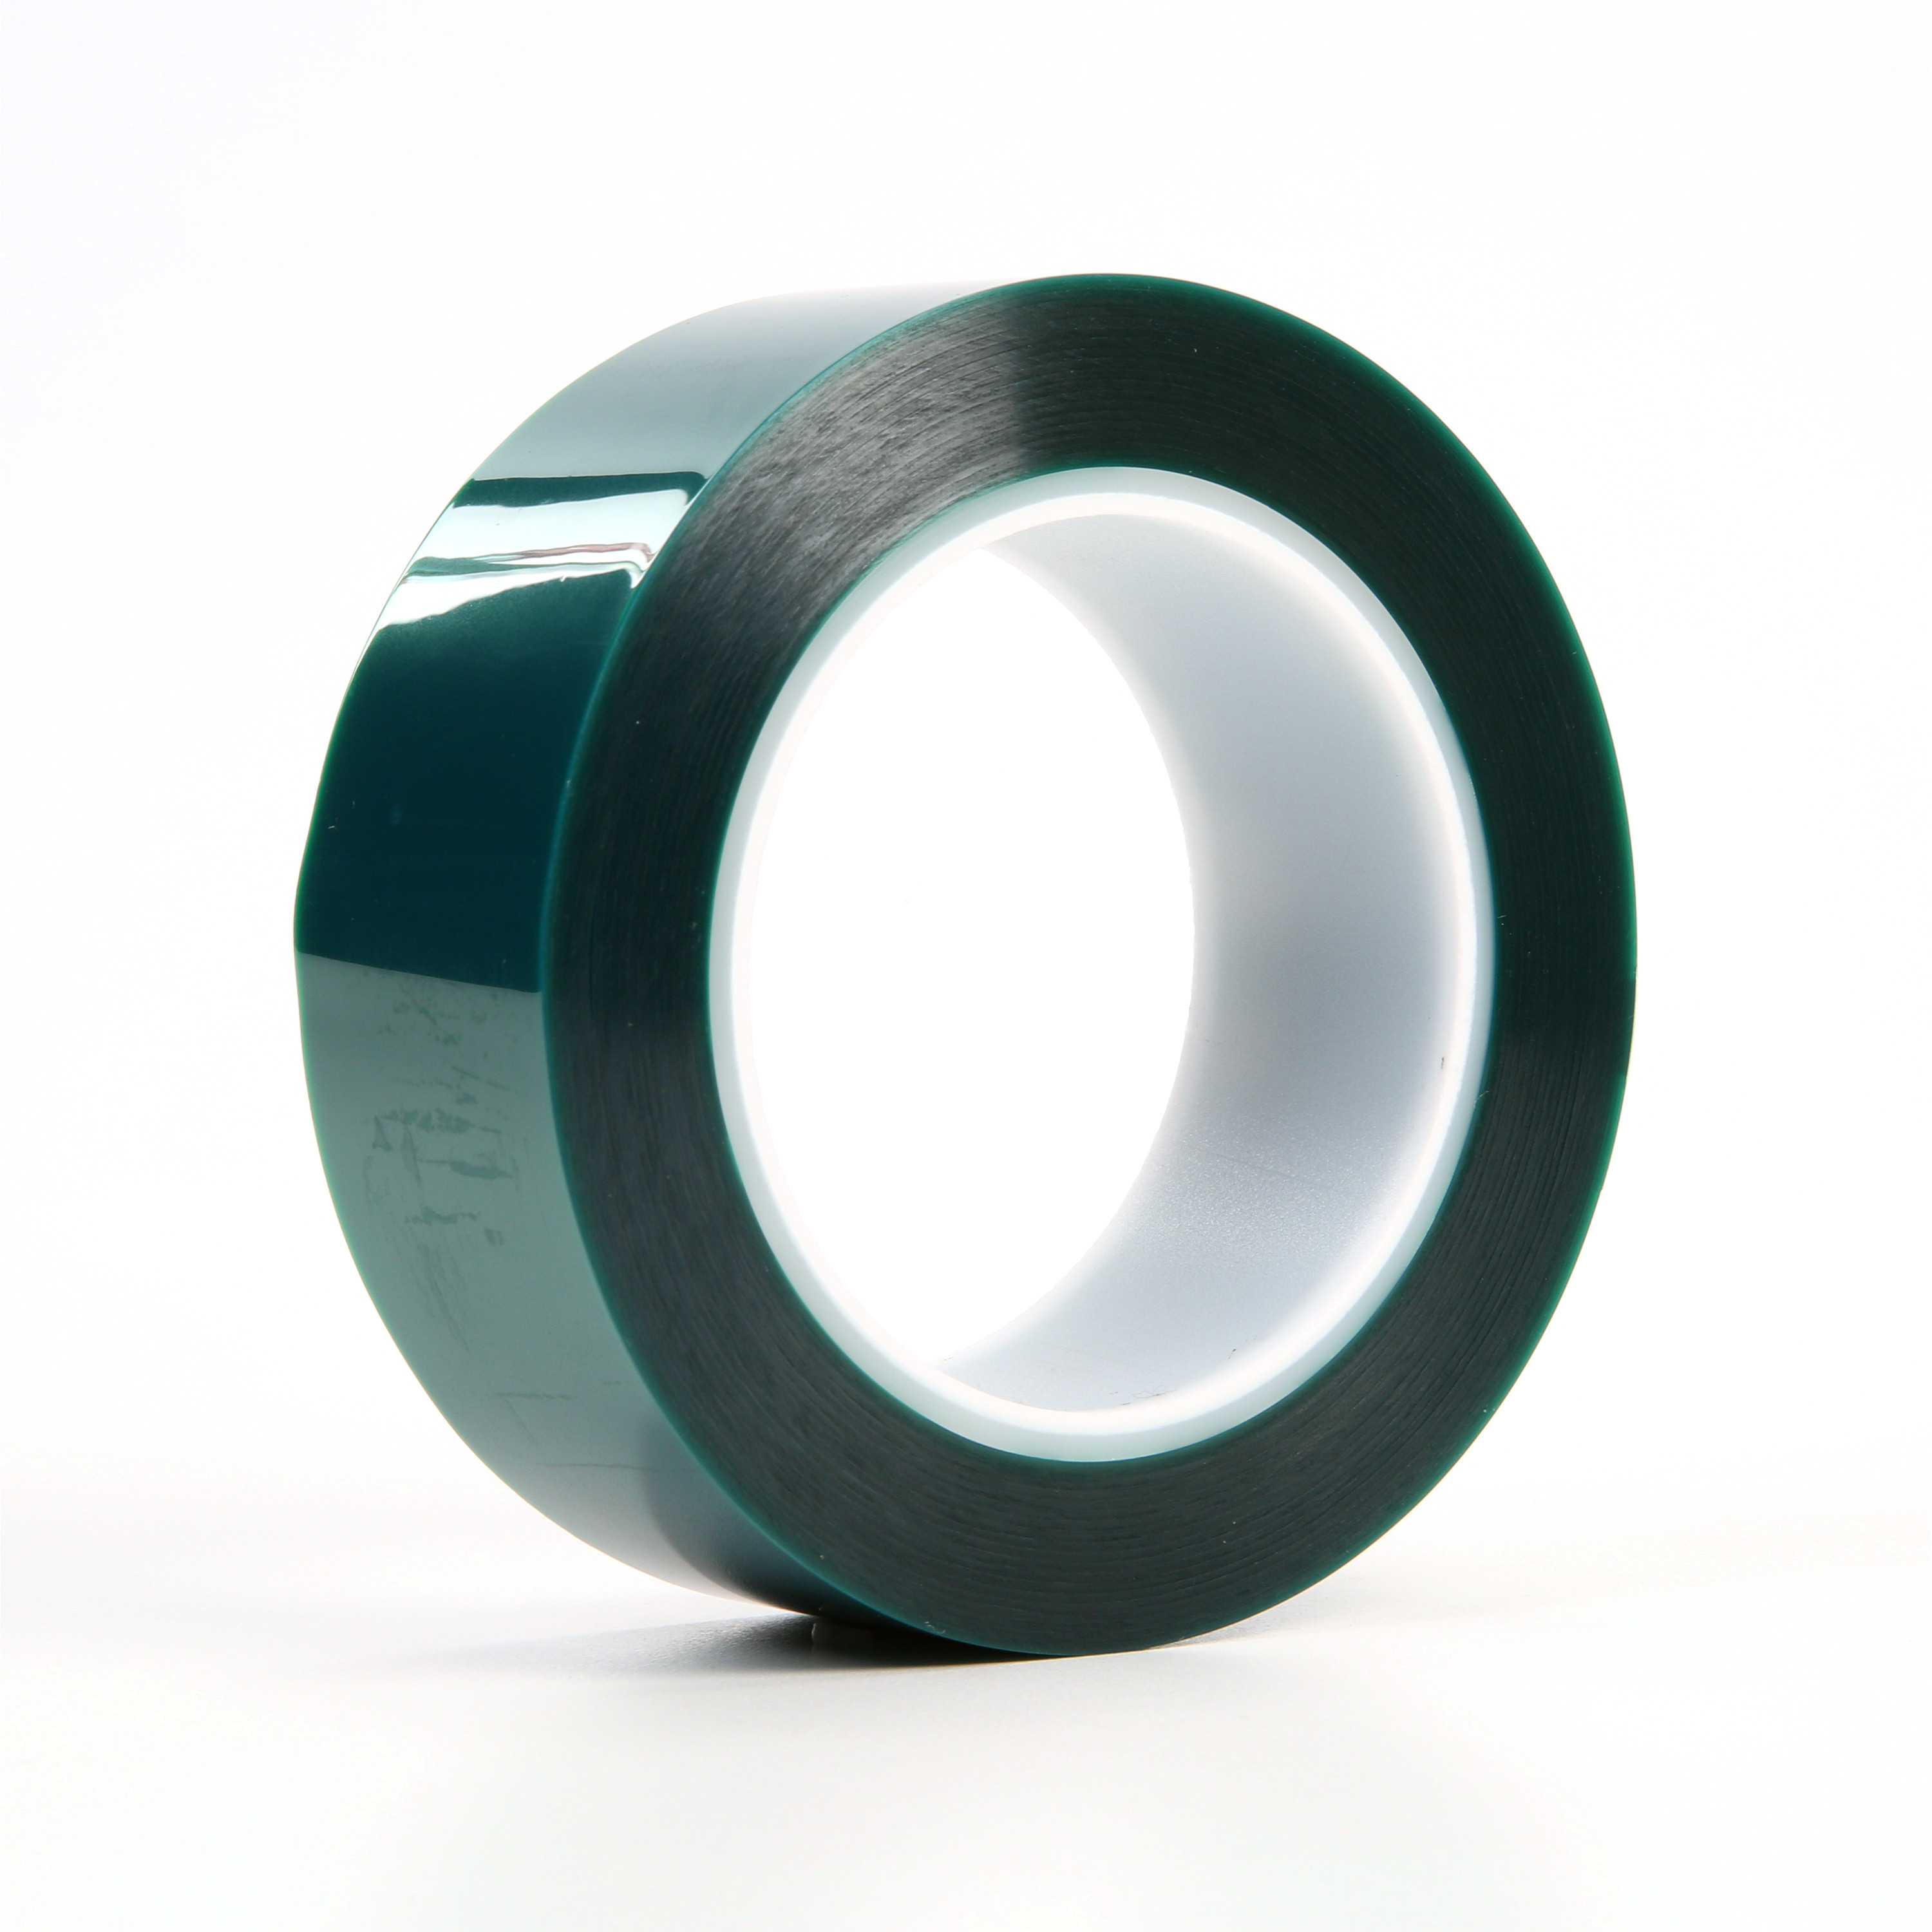 3M™ Polyester Tape 8992, Green, 1 1/2 in x 72 yd, 3.2 mil, 24 rolls per
case